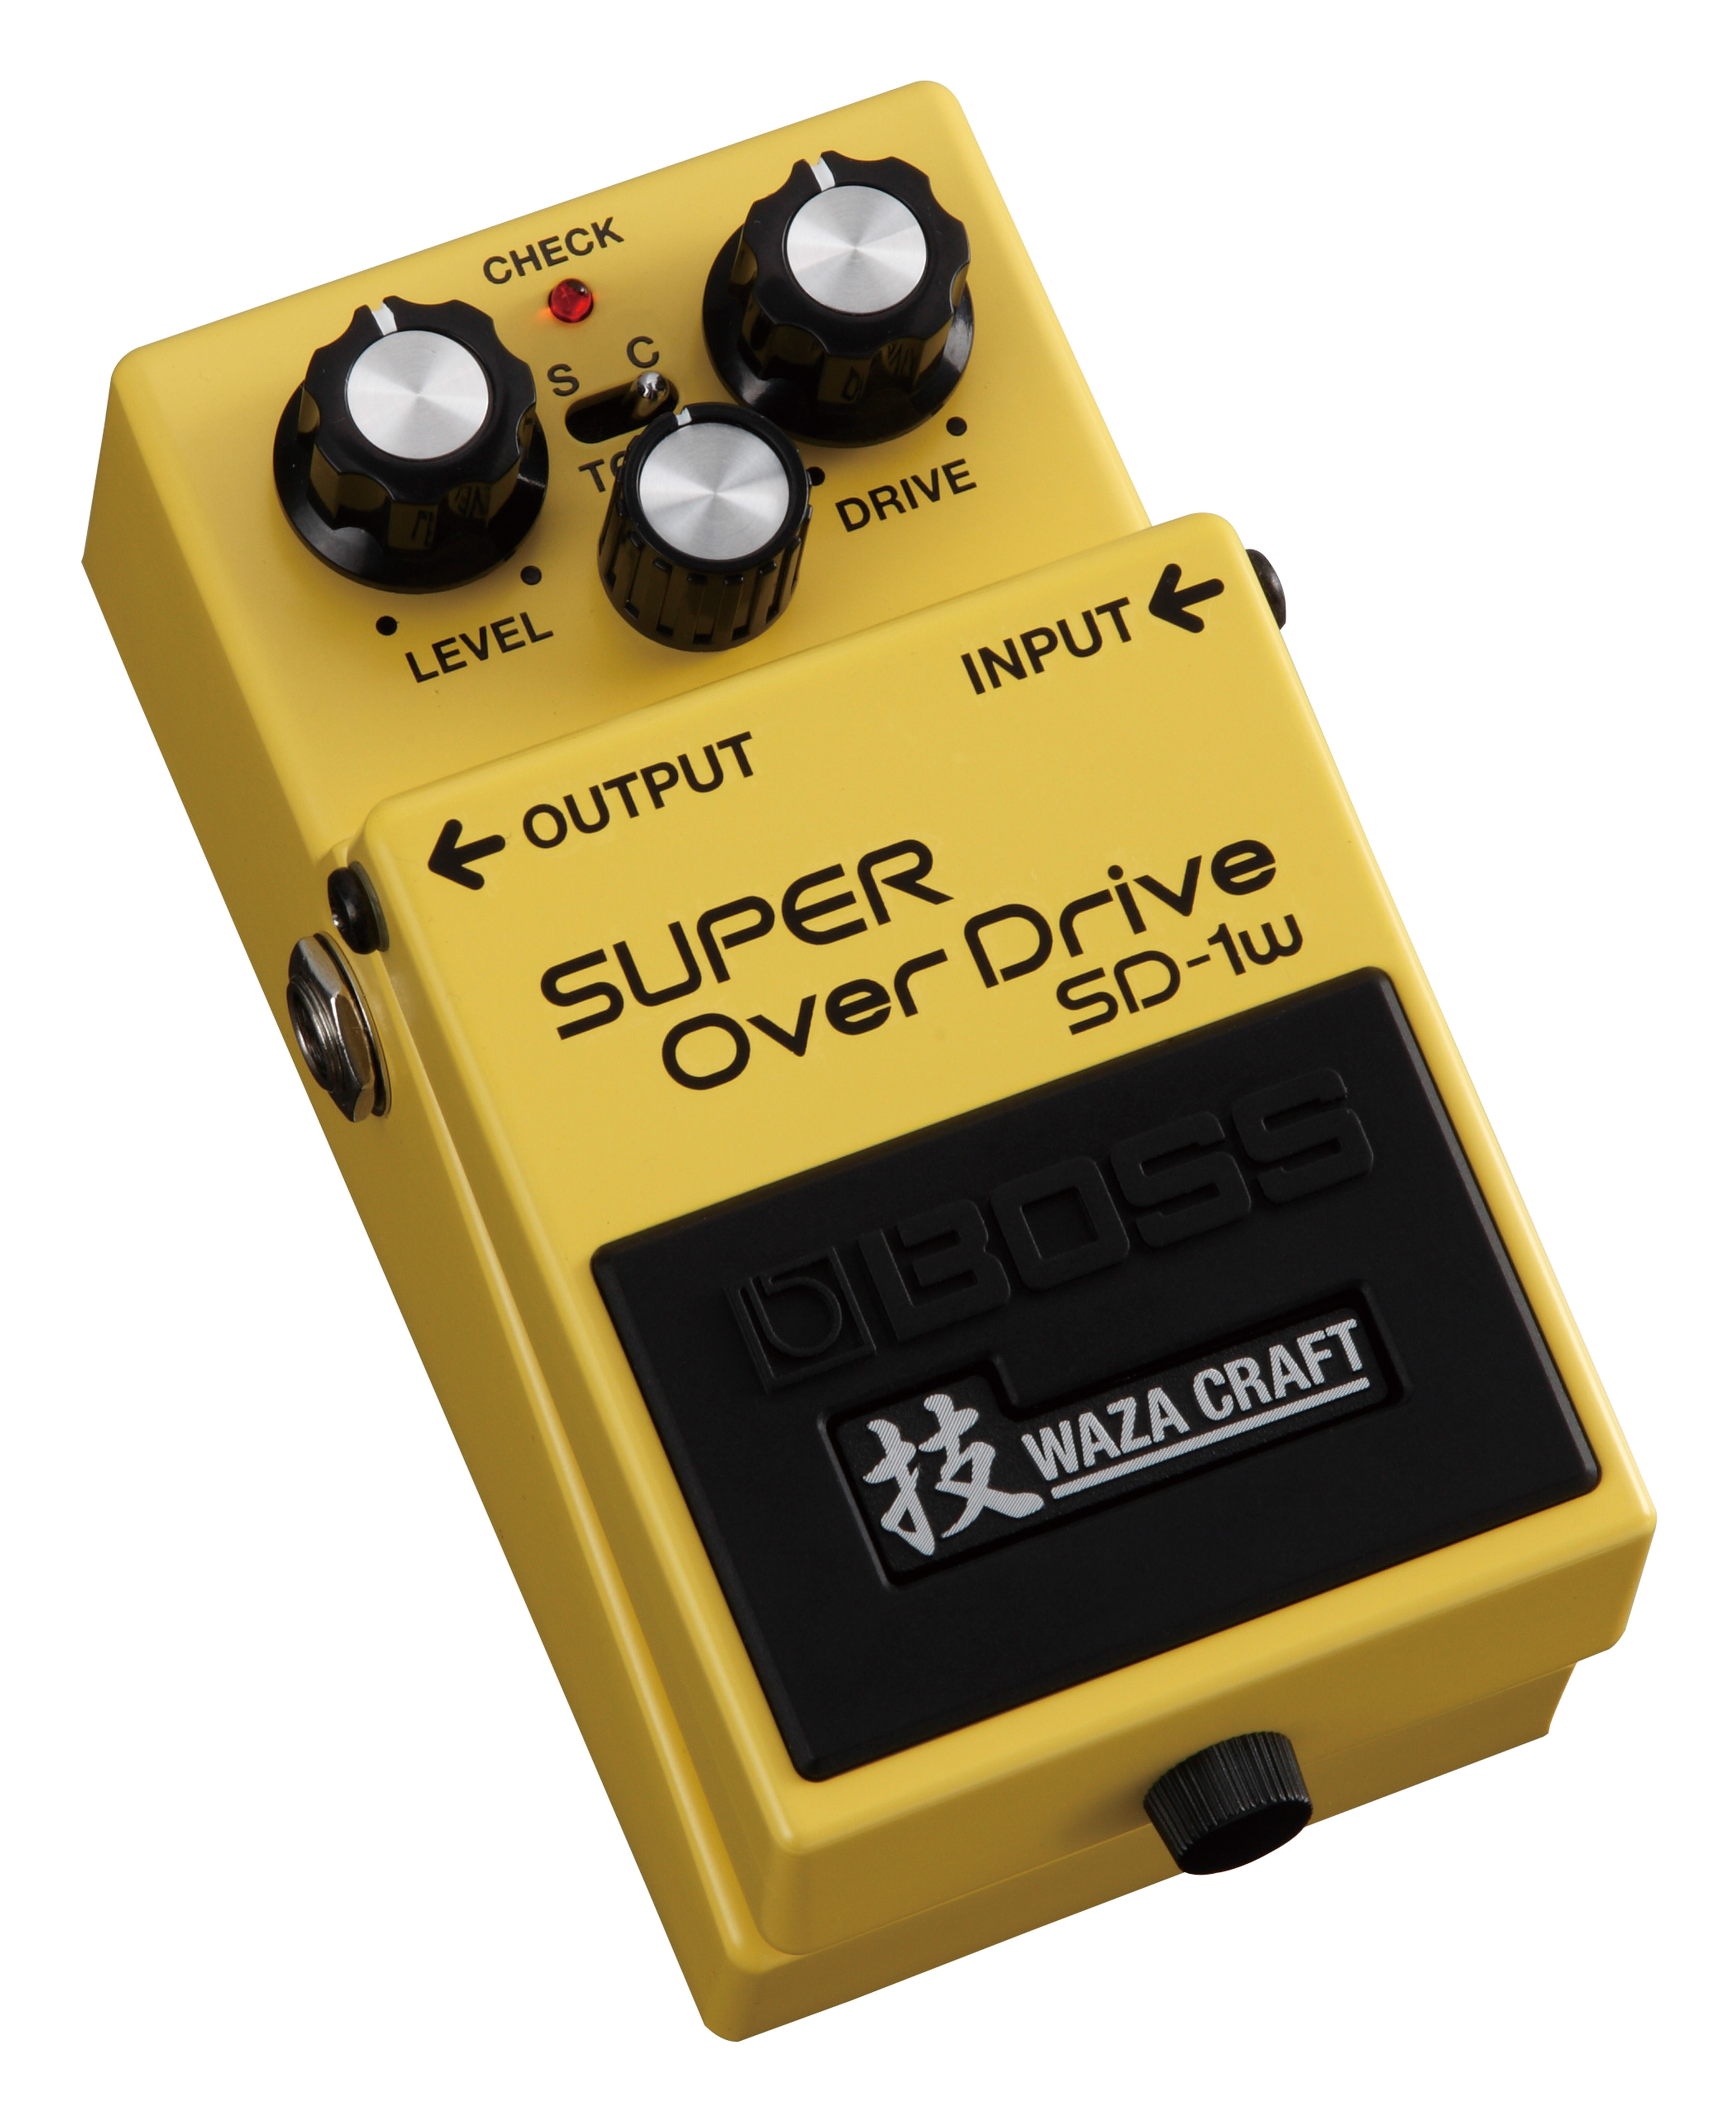 Boss Sd-1w Super Overdrive Waza Craft - Overdrive, distortion & fuzz effect pedal - Variation 1